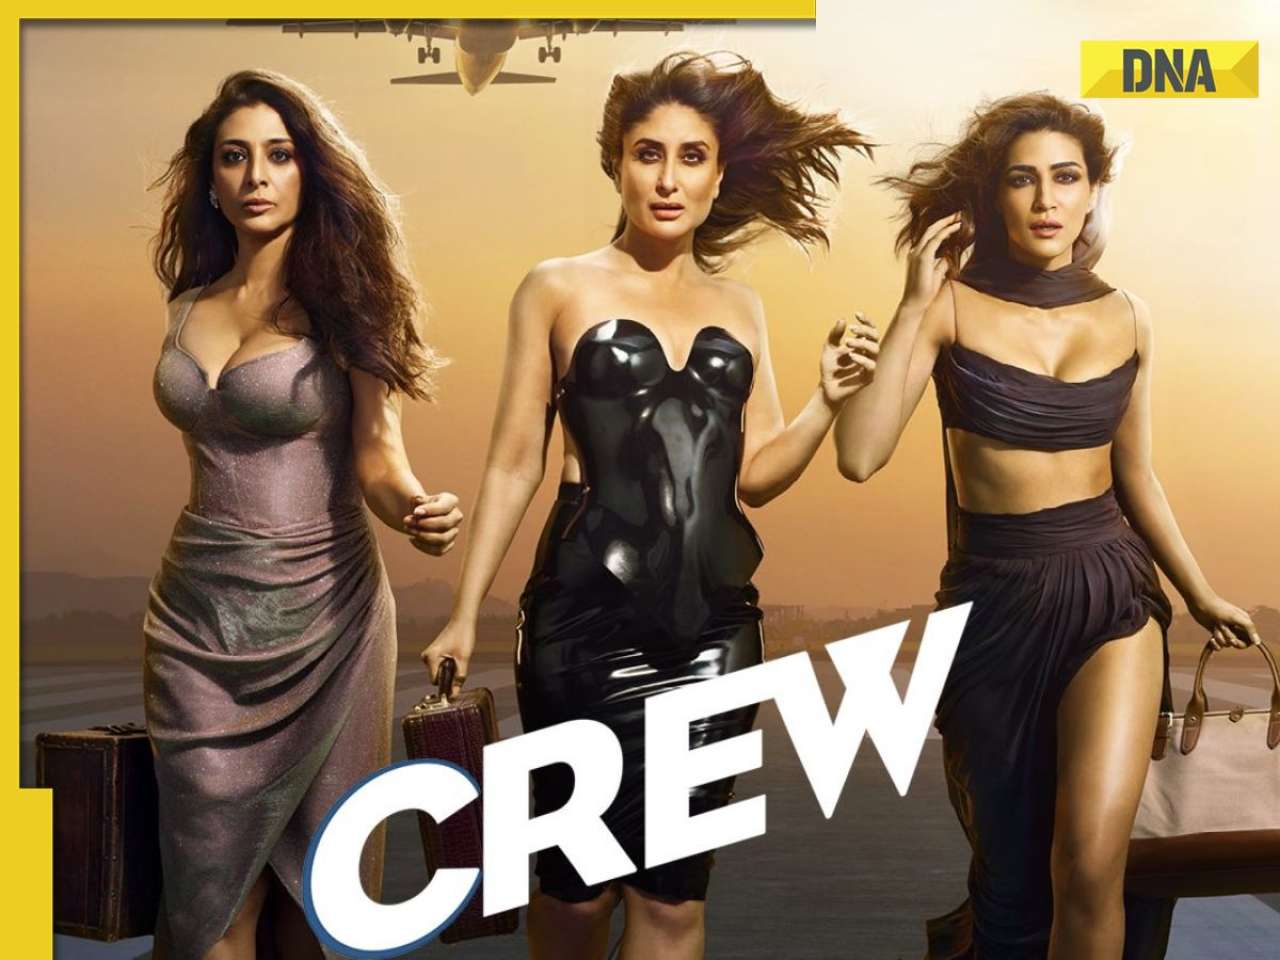 Tabu, Kareena Kapoor, Kriti Sanon-starrer Crew introduces buy-one-get-one ticket free offer; here's how you can avail